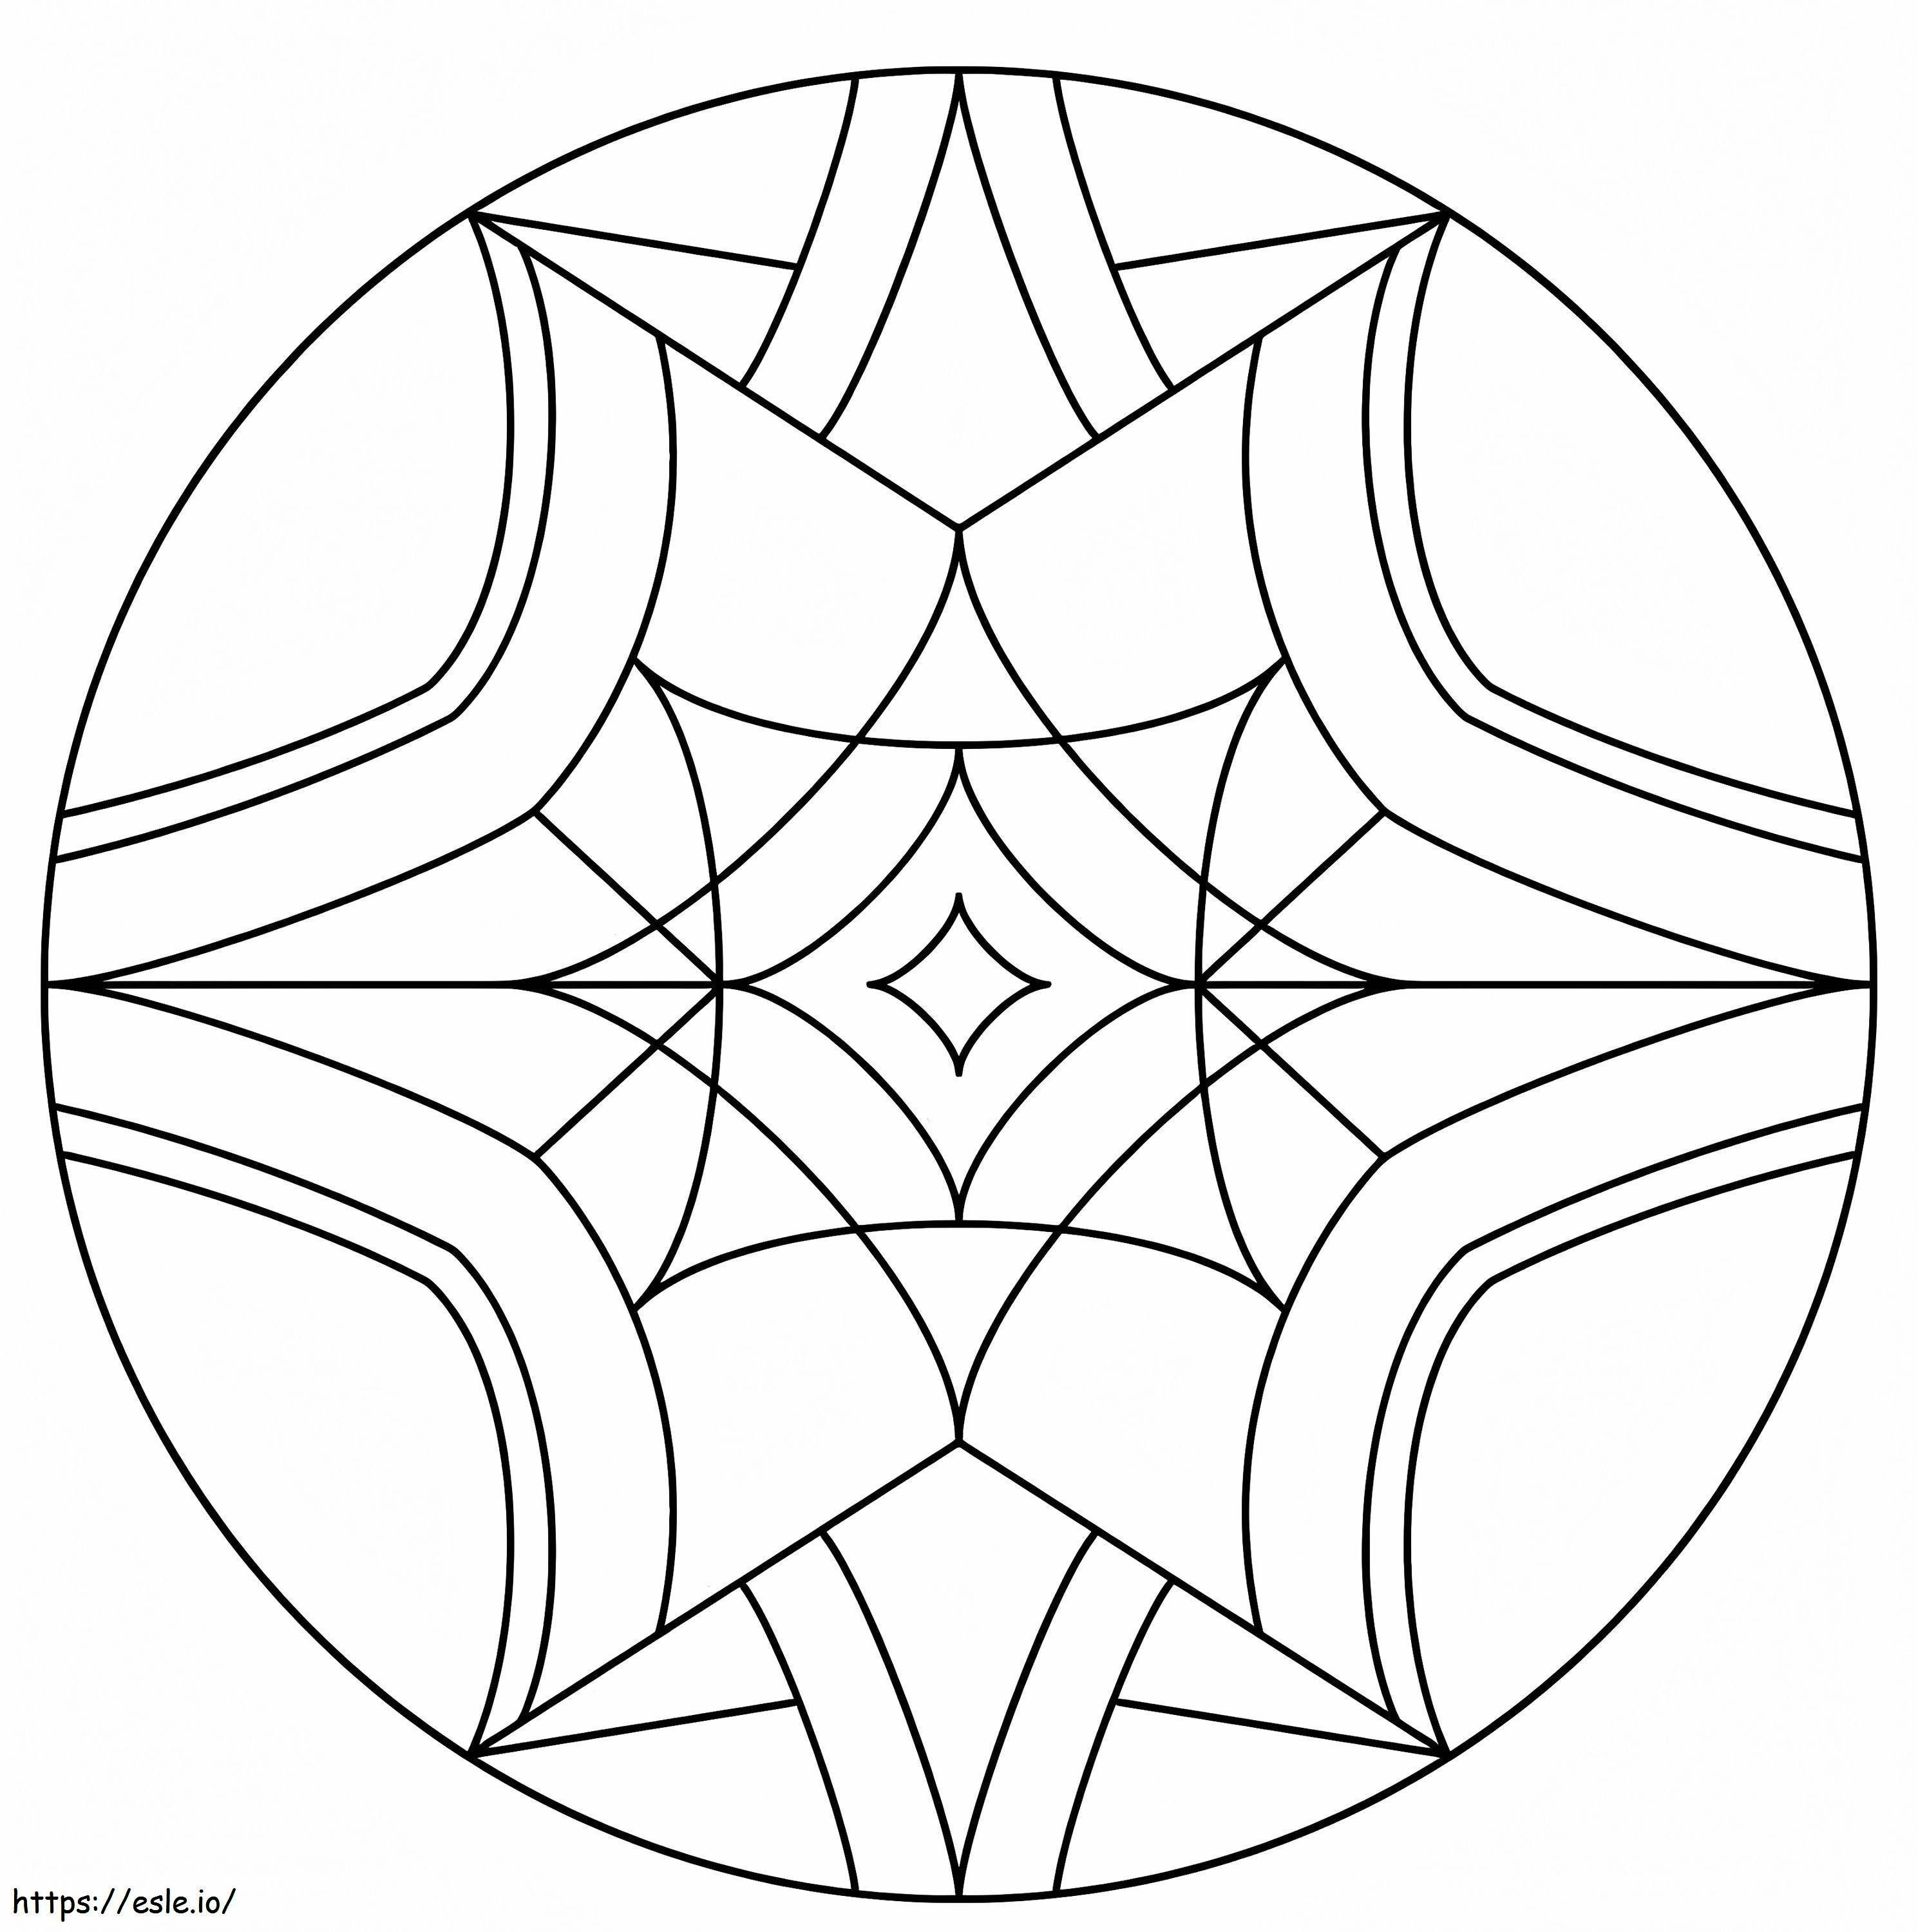 Kaleidoscope 15 coloring page